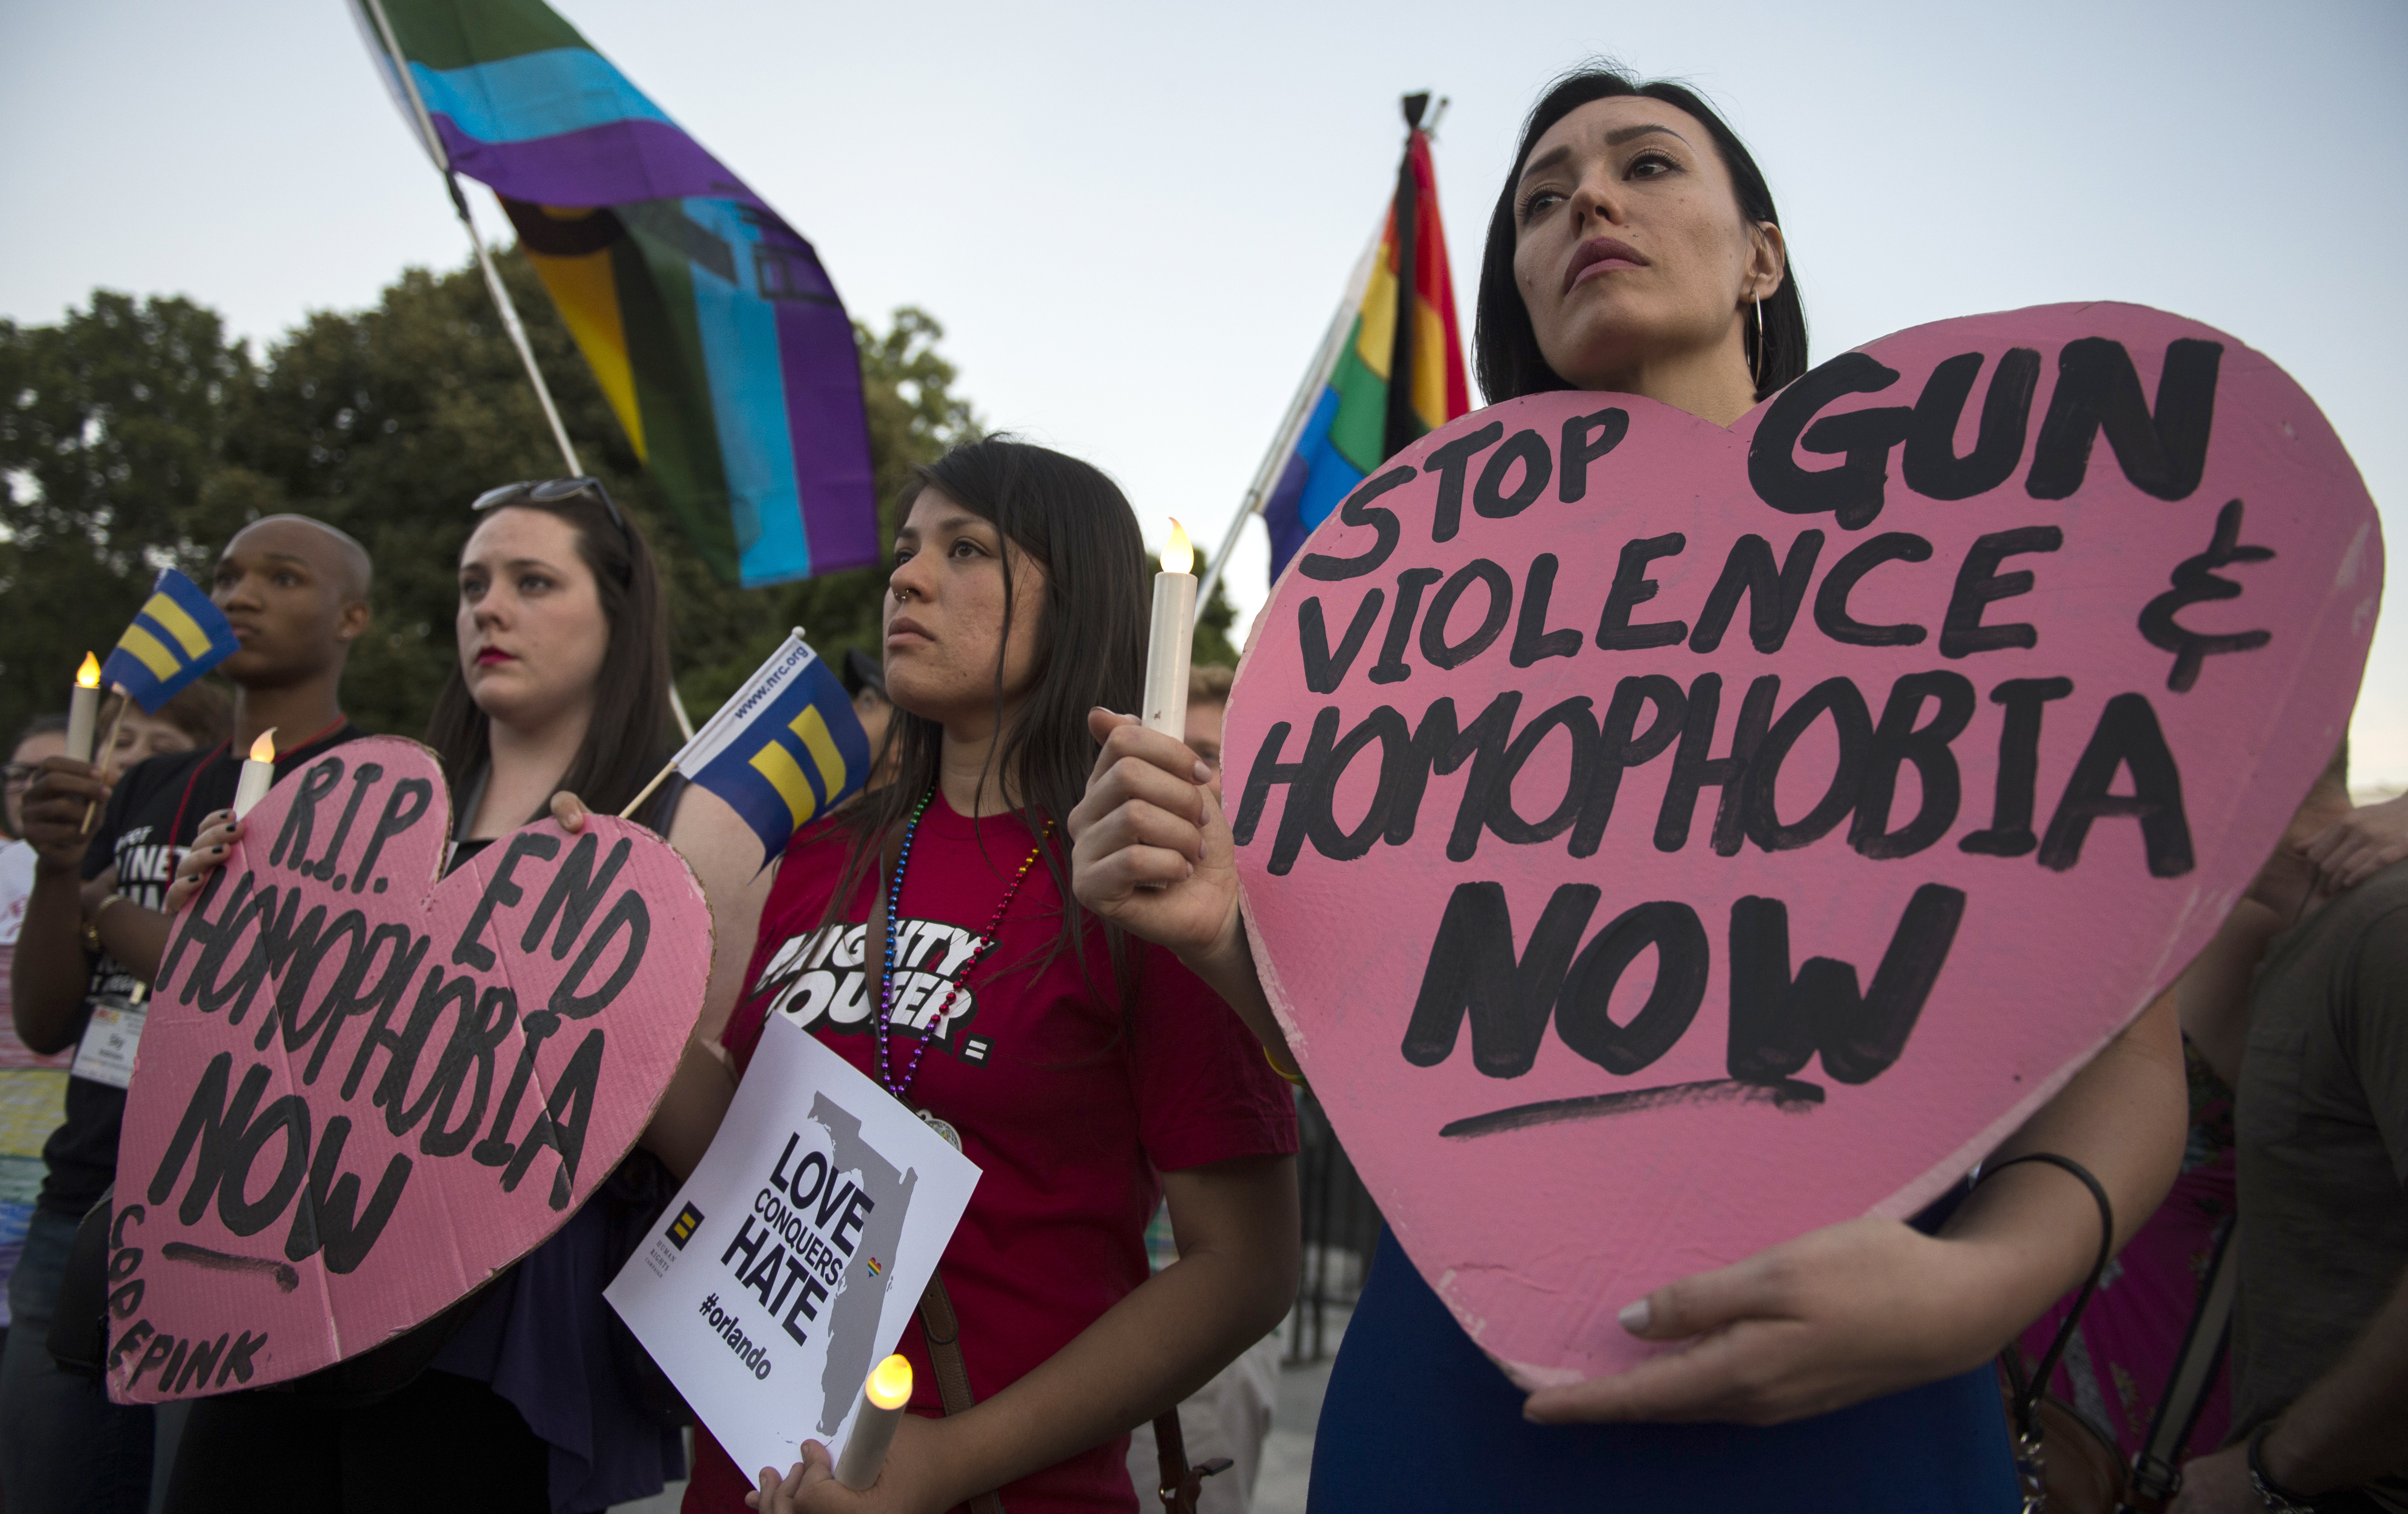 Mourners hold up signs during a vigil in Washington, DC on June 12, 2016, in reaction to the mass shooting at a gay nightclub in Orlando, Florida.  Fifty people died when a gunman allegedly inspired by the Islamic State group opened fire inside a gay nightclub in Florida, in the worst terror attack on US soil since September 11, 2001. / AFP PHOTO / Andrew Caballero-Reynolds